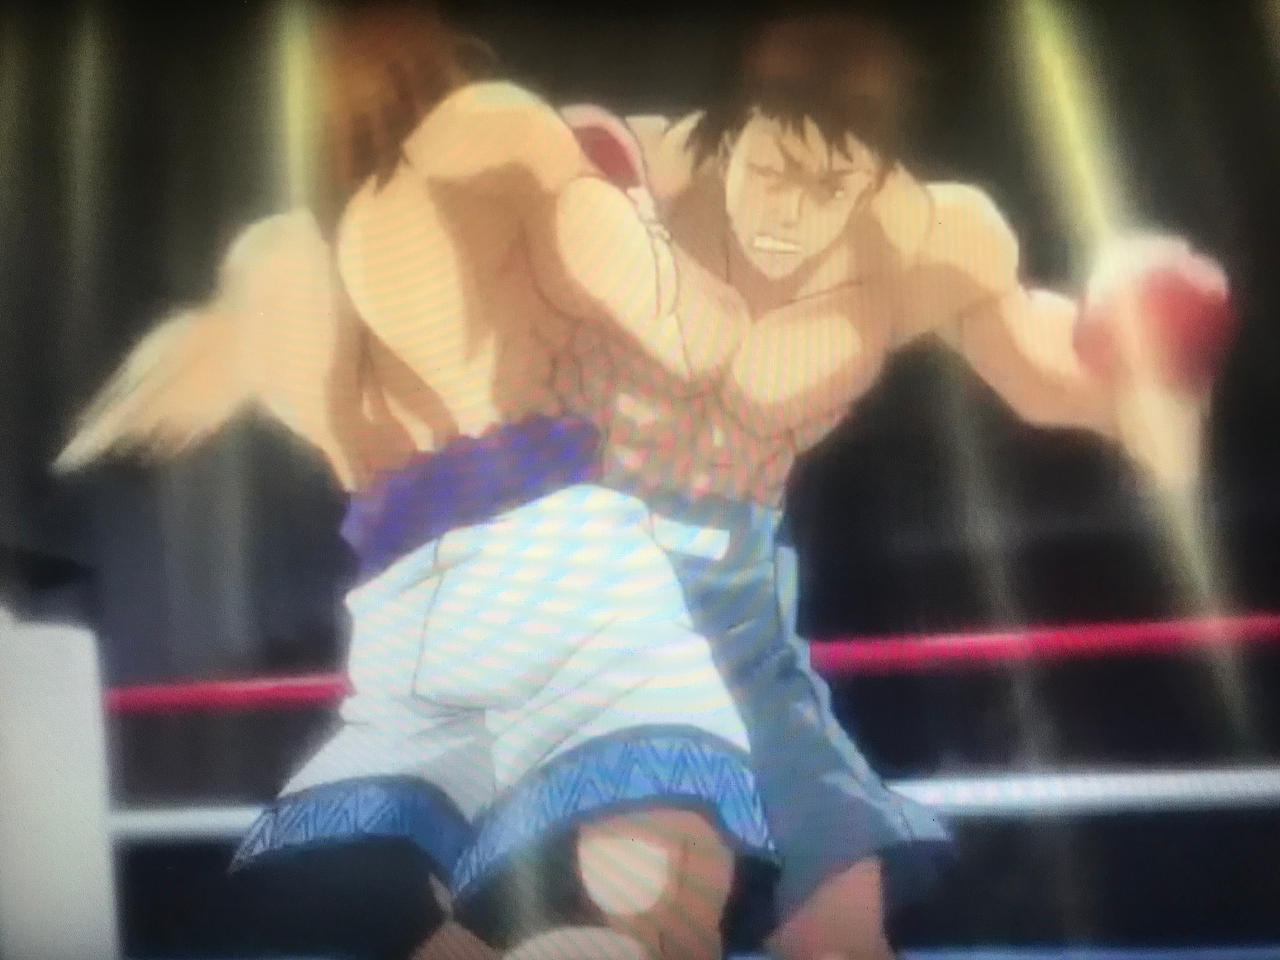 THIS WAS SO ONE SIDED  HAJIME NO IPPO: NEW CHALLENGER EPISODE 5-8